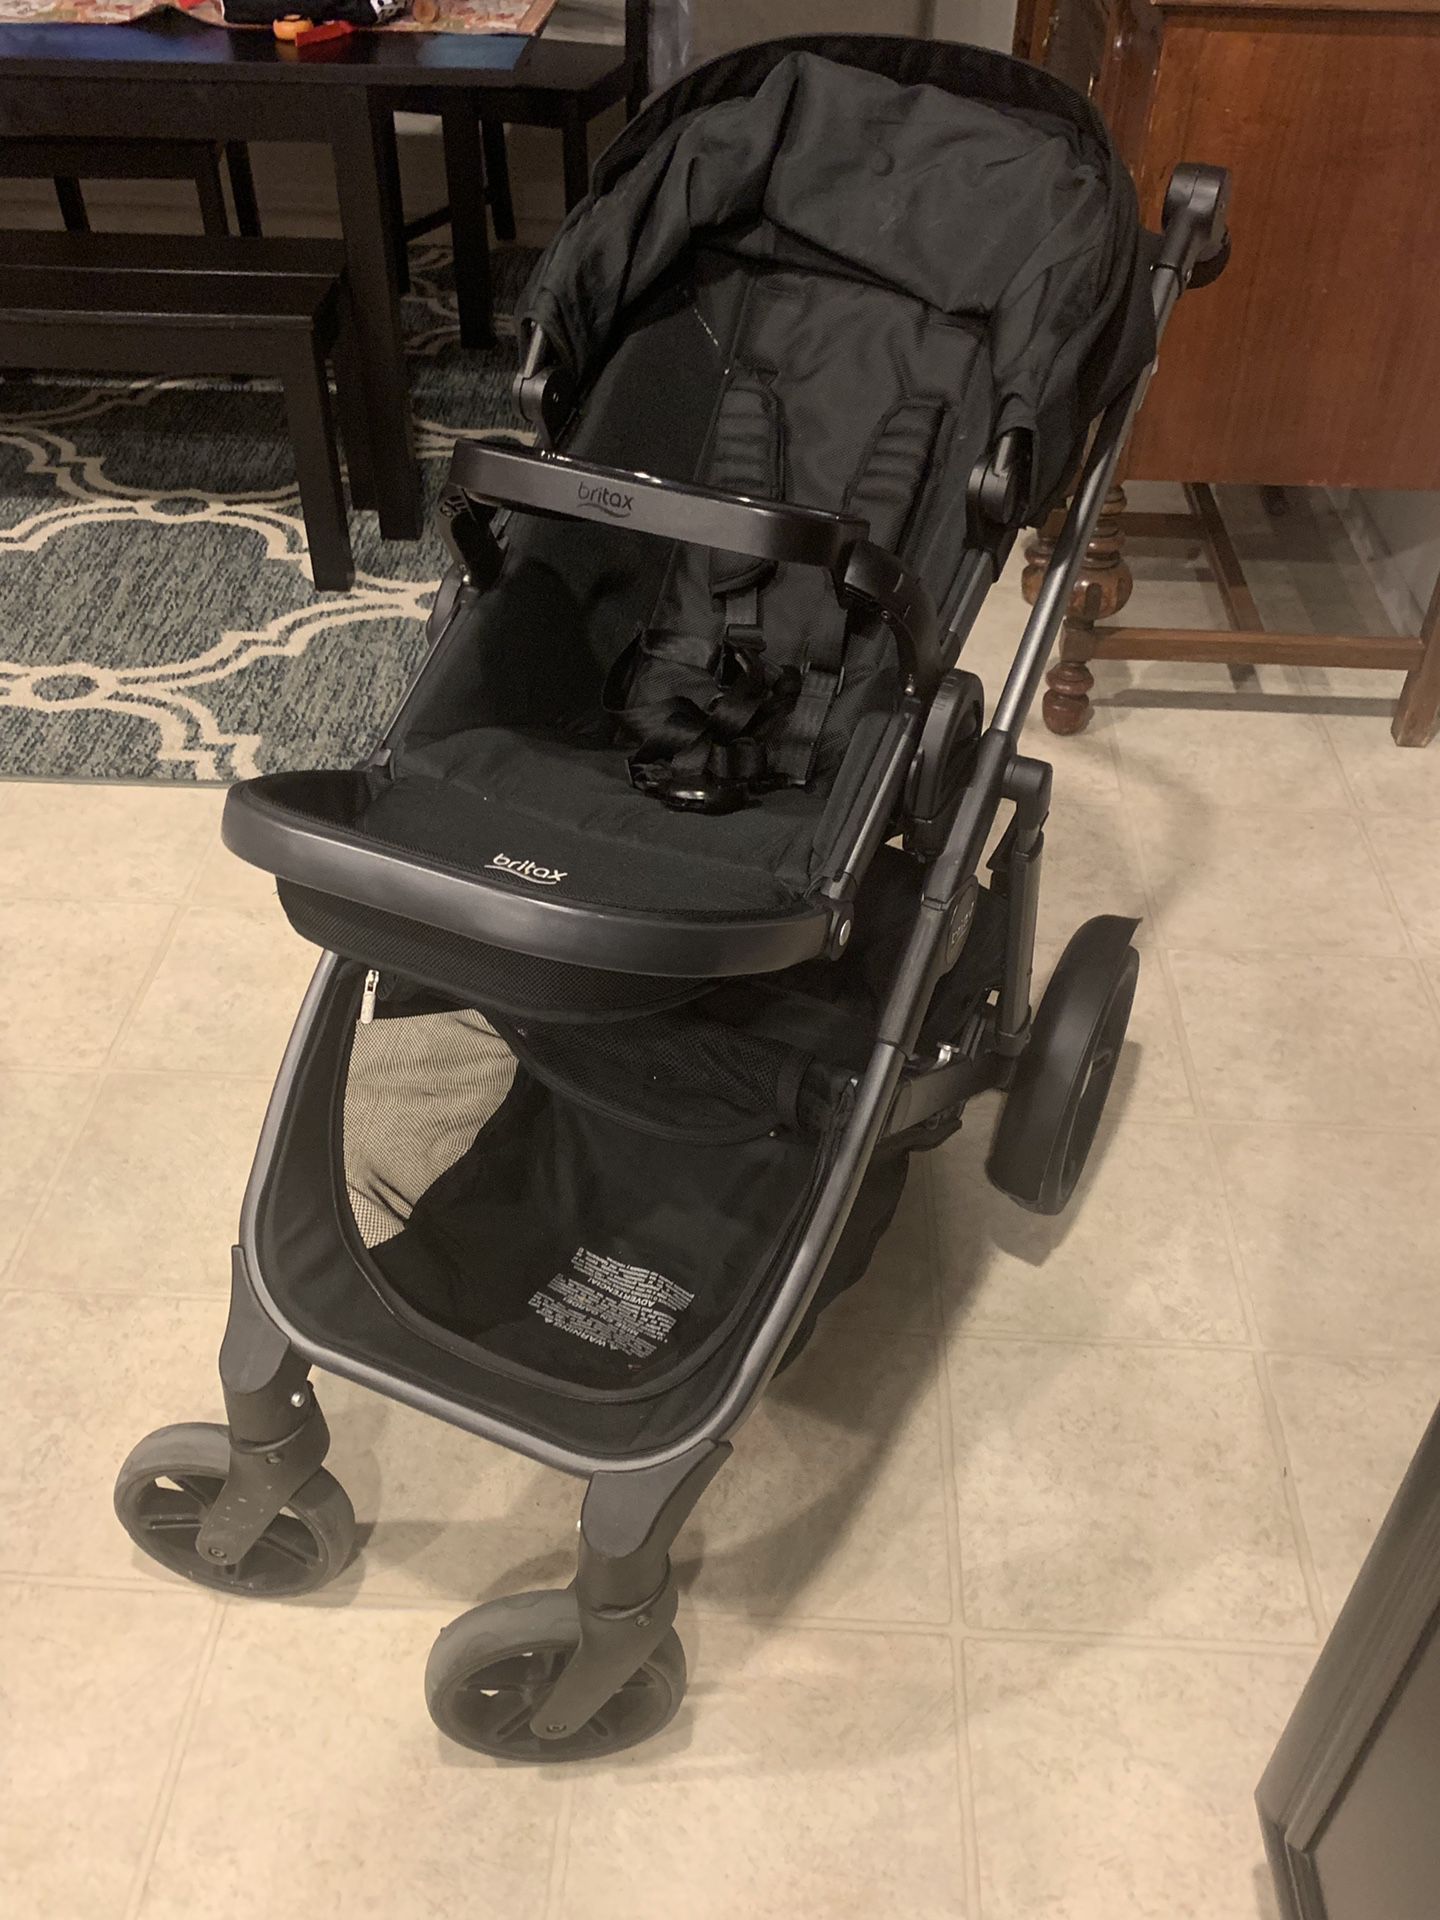 2016 Britax B Ready Stroller with infant car seat adapter